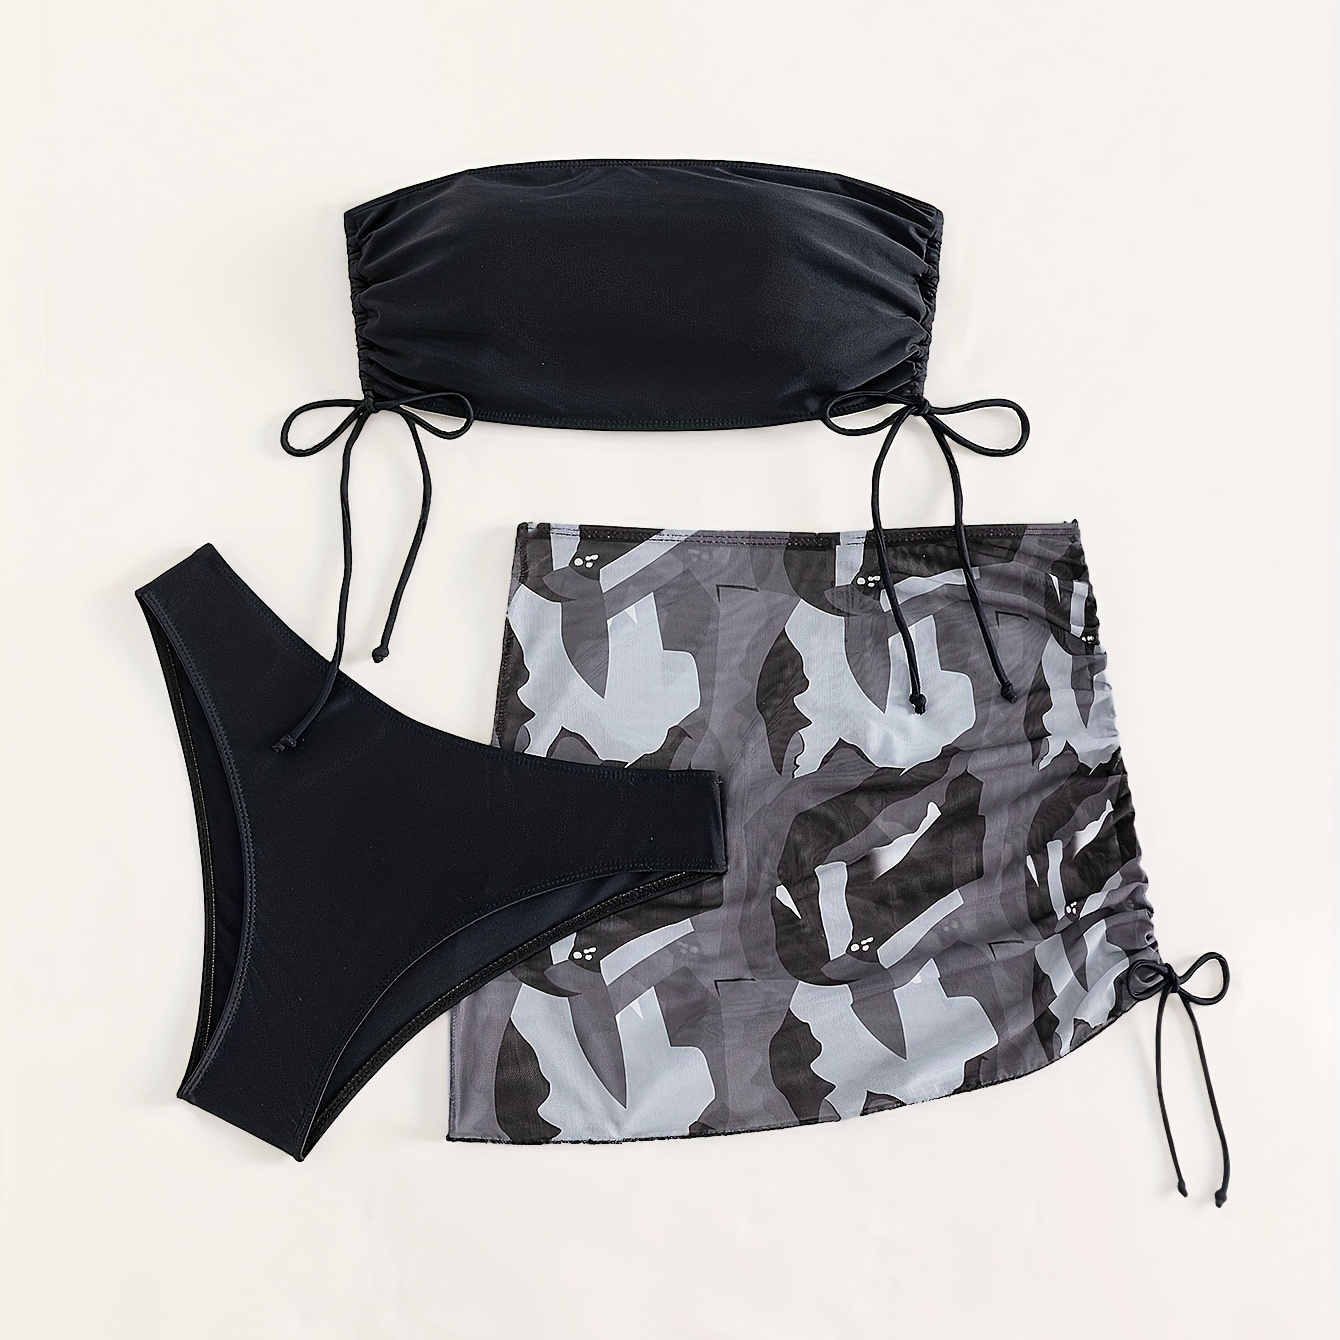 

3-pieces Bandeau Bikini Sets, Strapless Tube Top Tie Side High Cut With Camo Cover Up Wraps Swimsuit, Women's Swimwear & Clothing